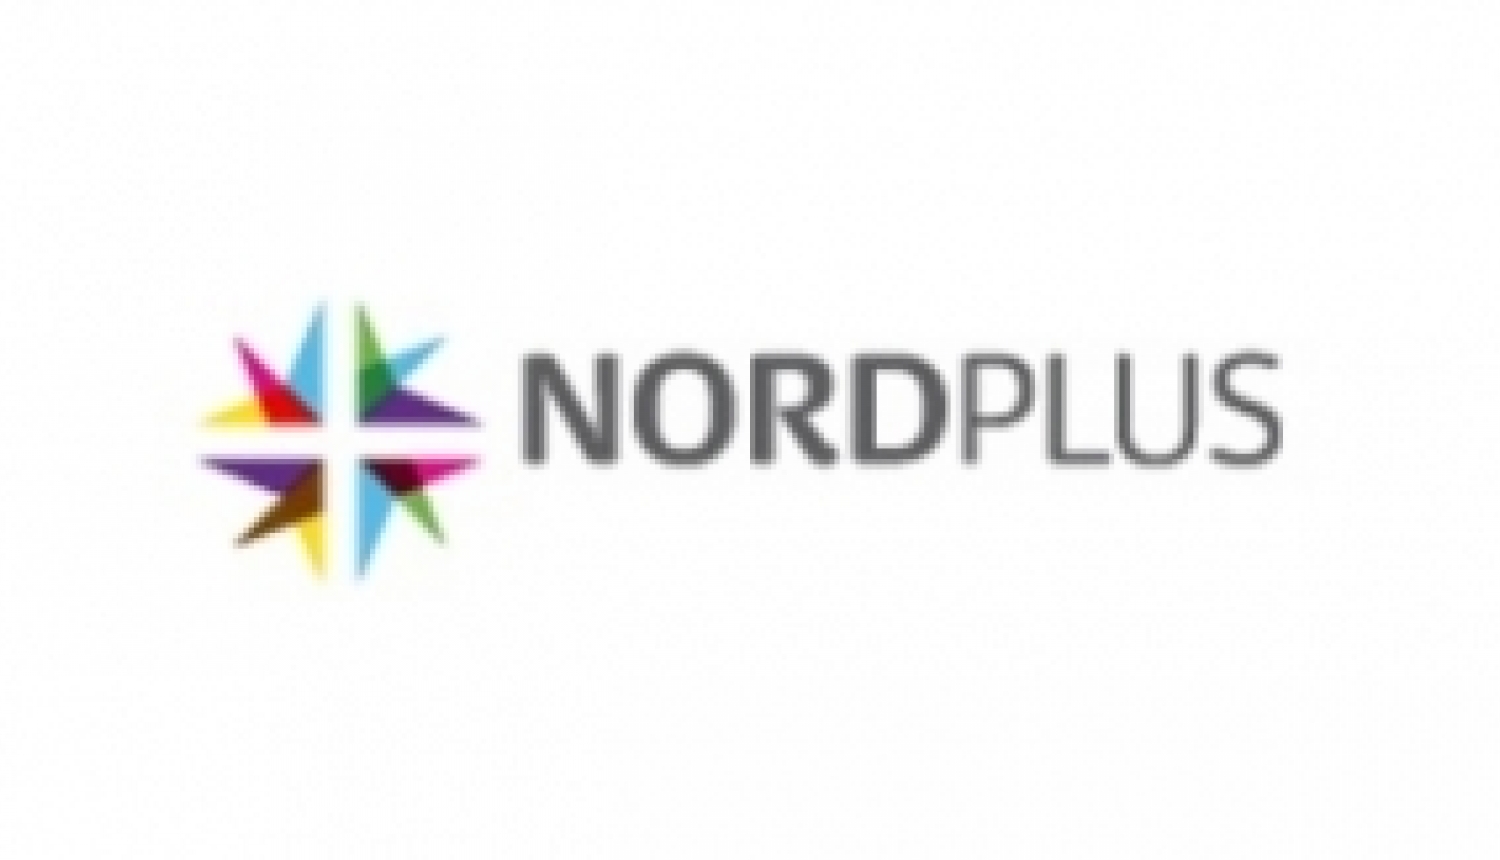 Call for applications to Nordplus 2016